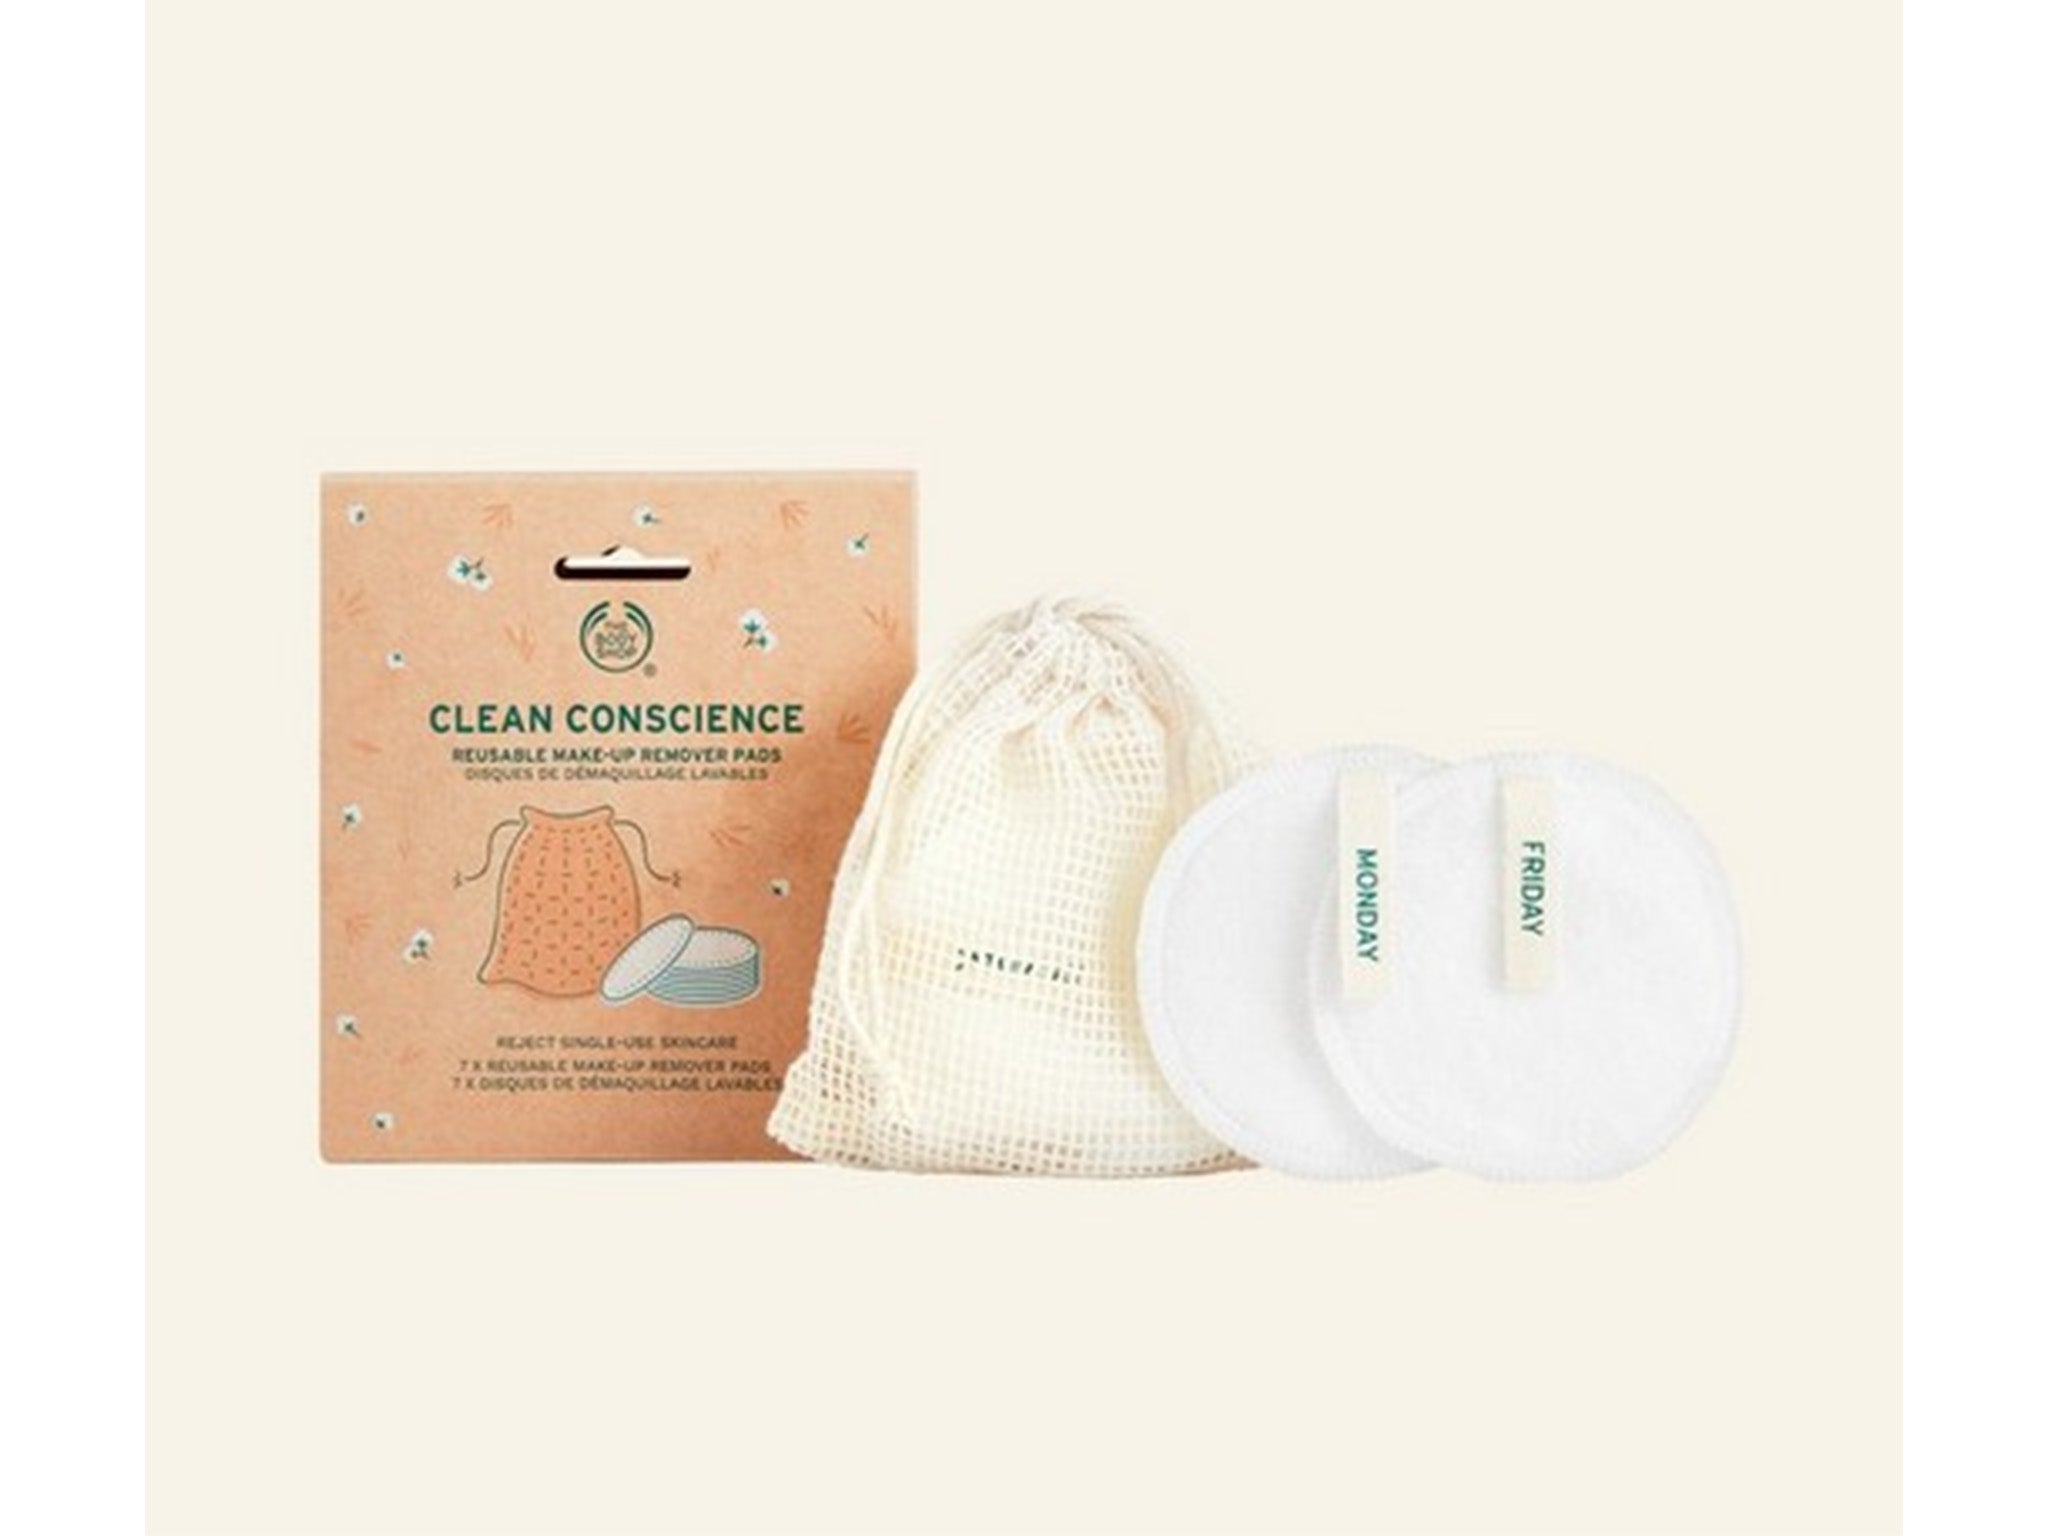 The Body Shop clean conscience reusable make-up remover pads